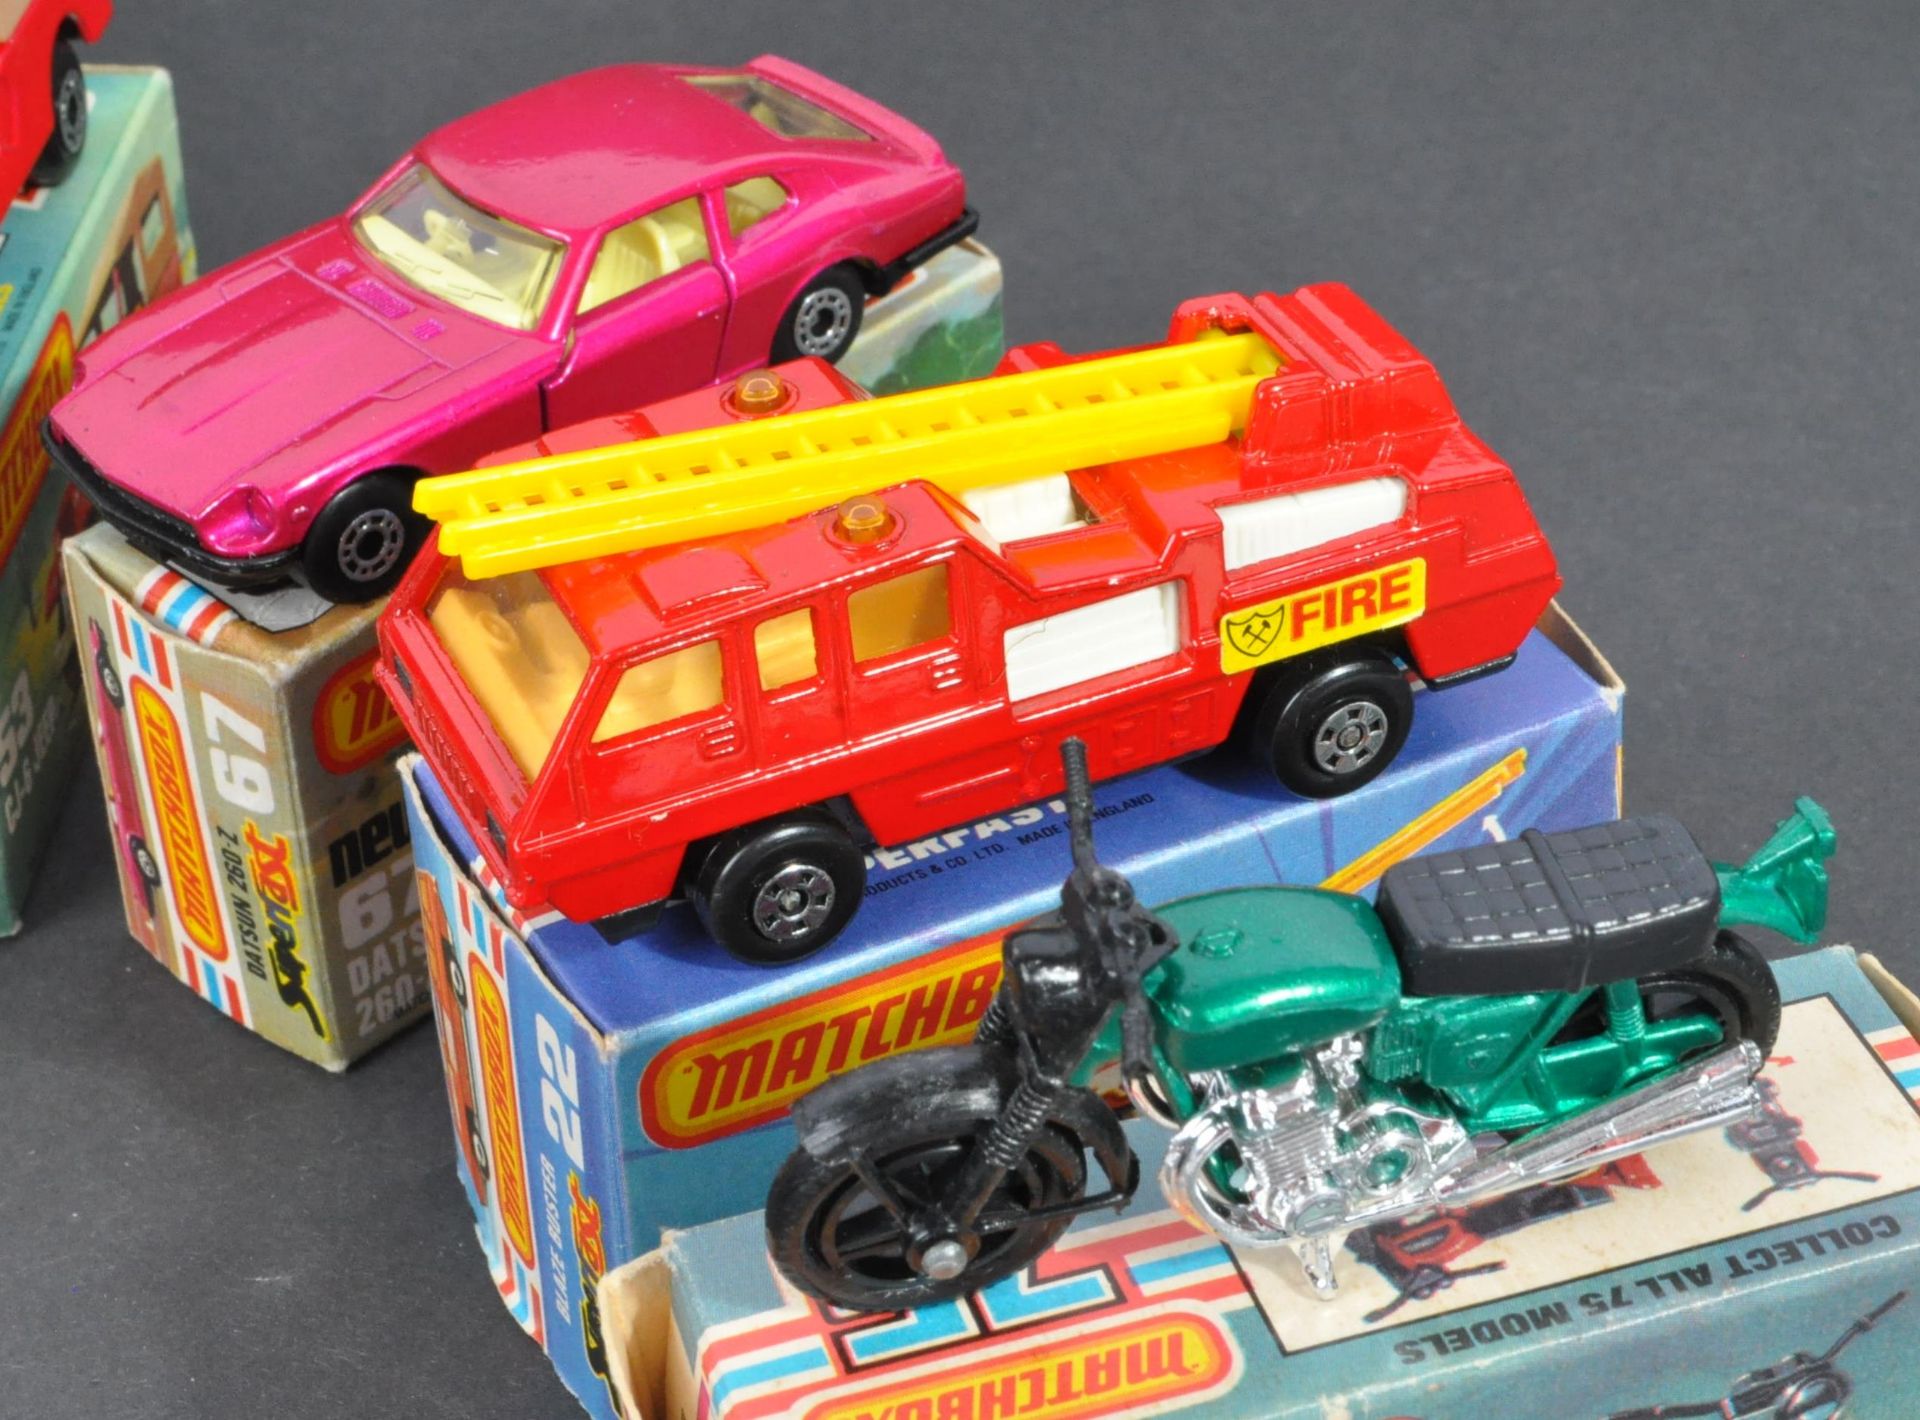 COLLECTION OF VINTAGE MATCHBOX 1-75 SERIES BOXED DIECAST MODELS - Image 4 of 4